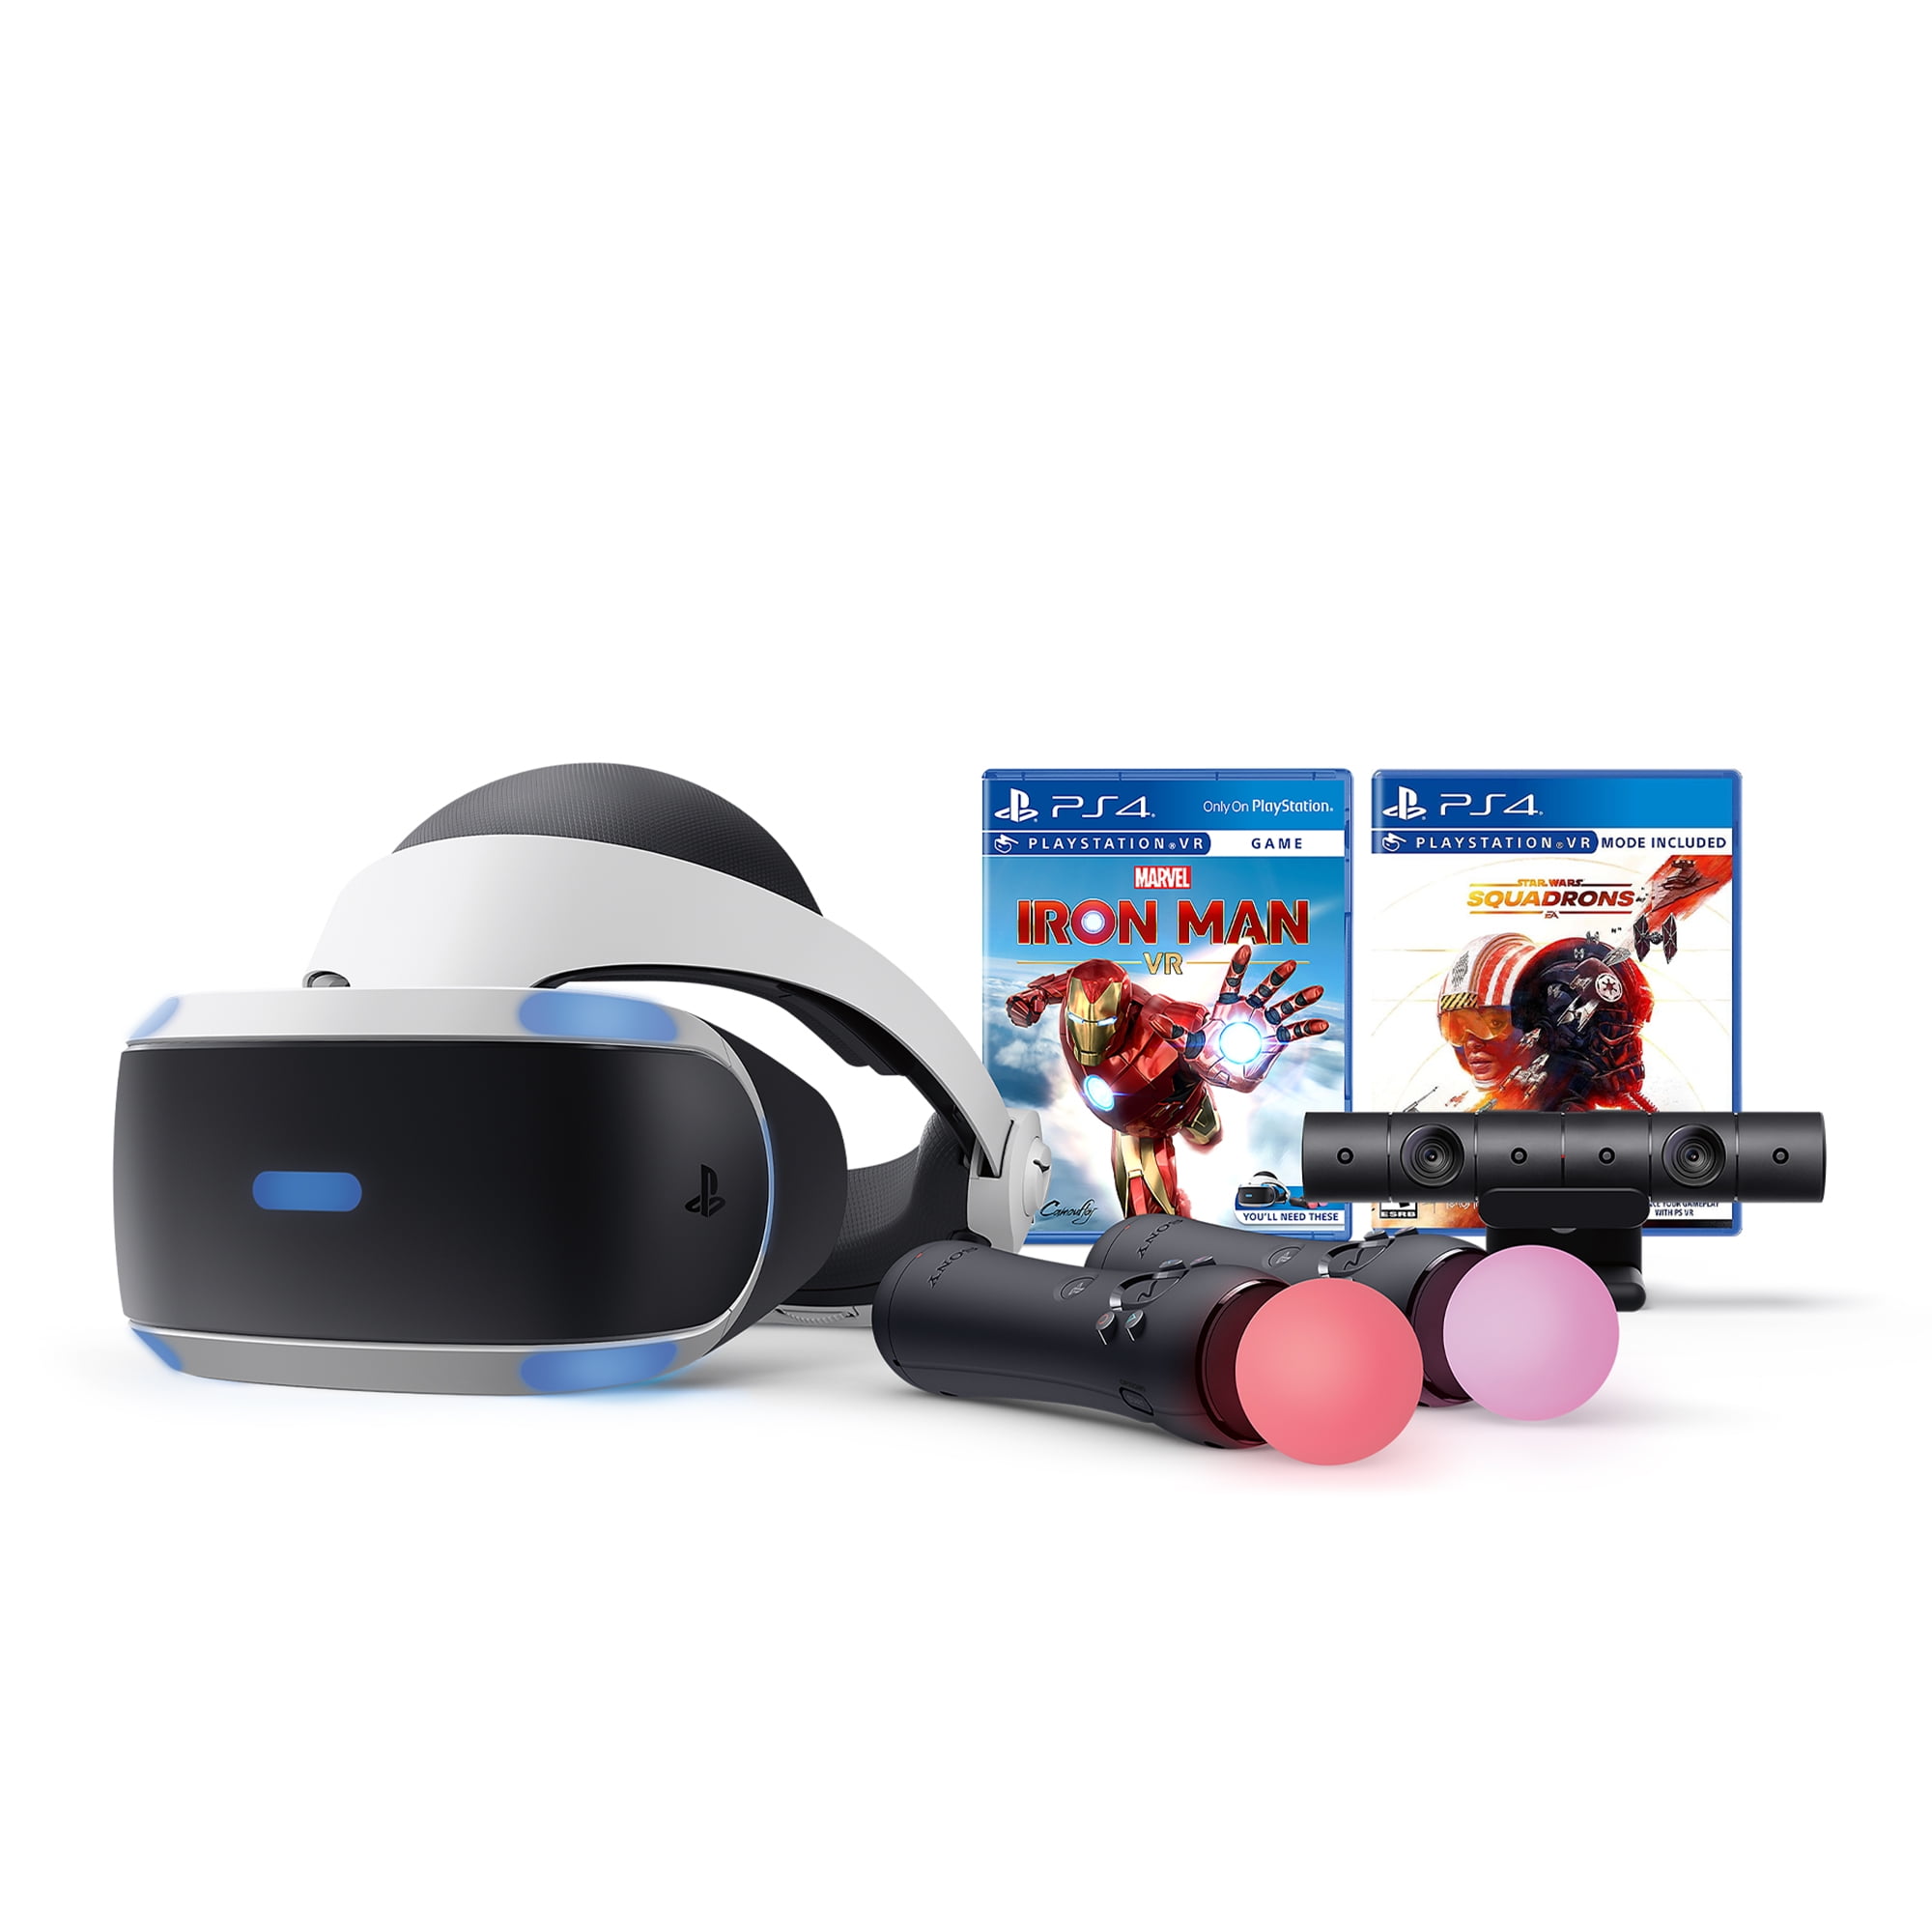 PlayStation VR Iron Man and Wars Bundle, PS4 & 5 Compatible: VR Headset, Camera, Motion Controllers, Iron Man, Star Wars Walmart.com